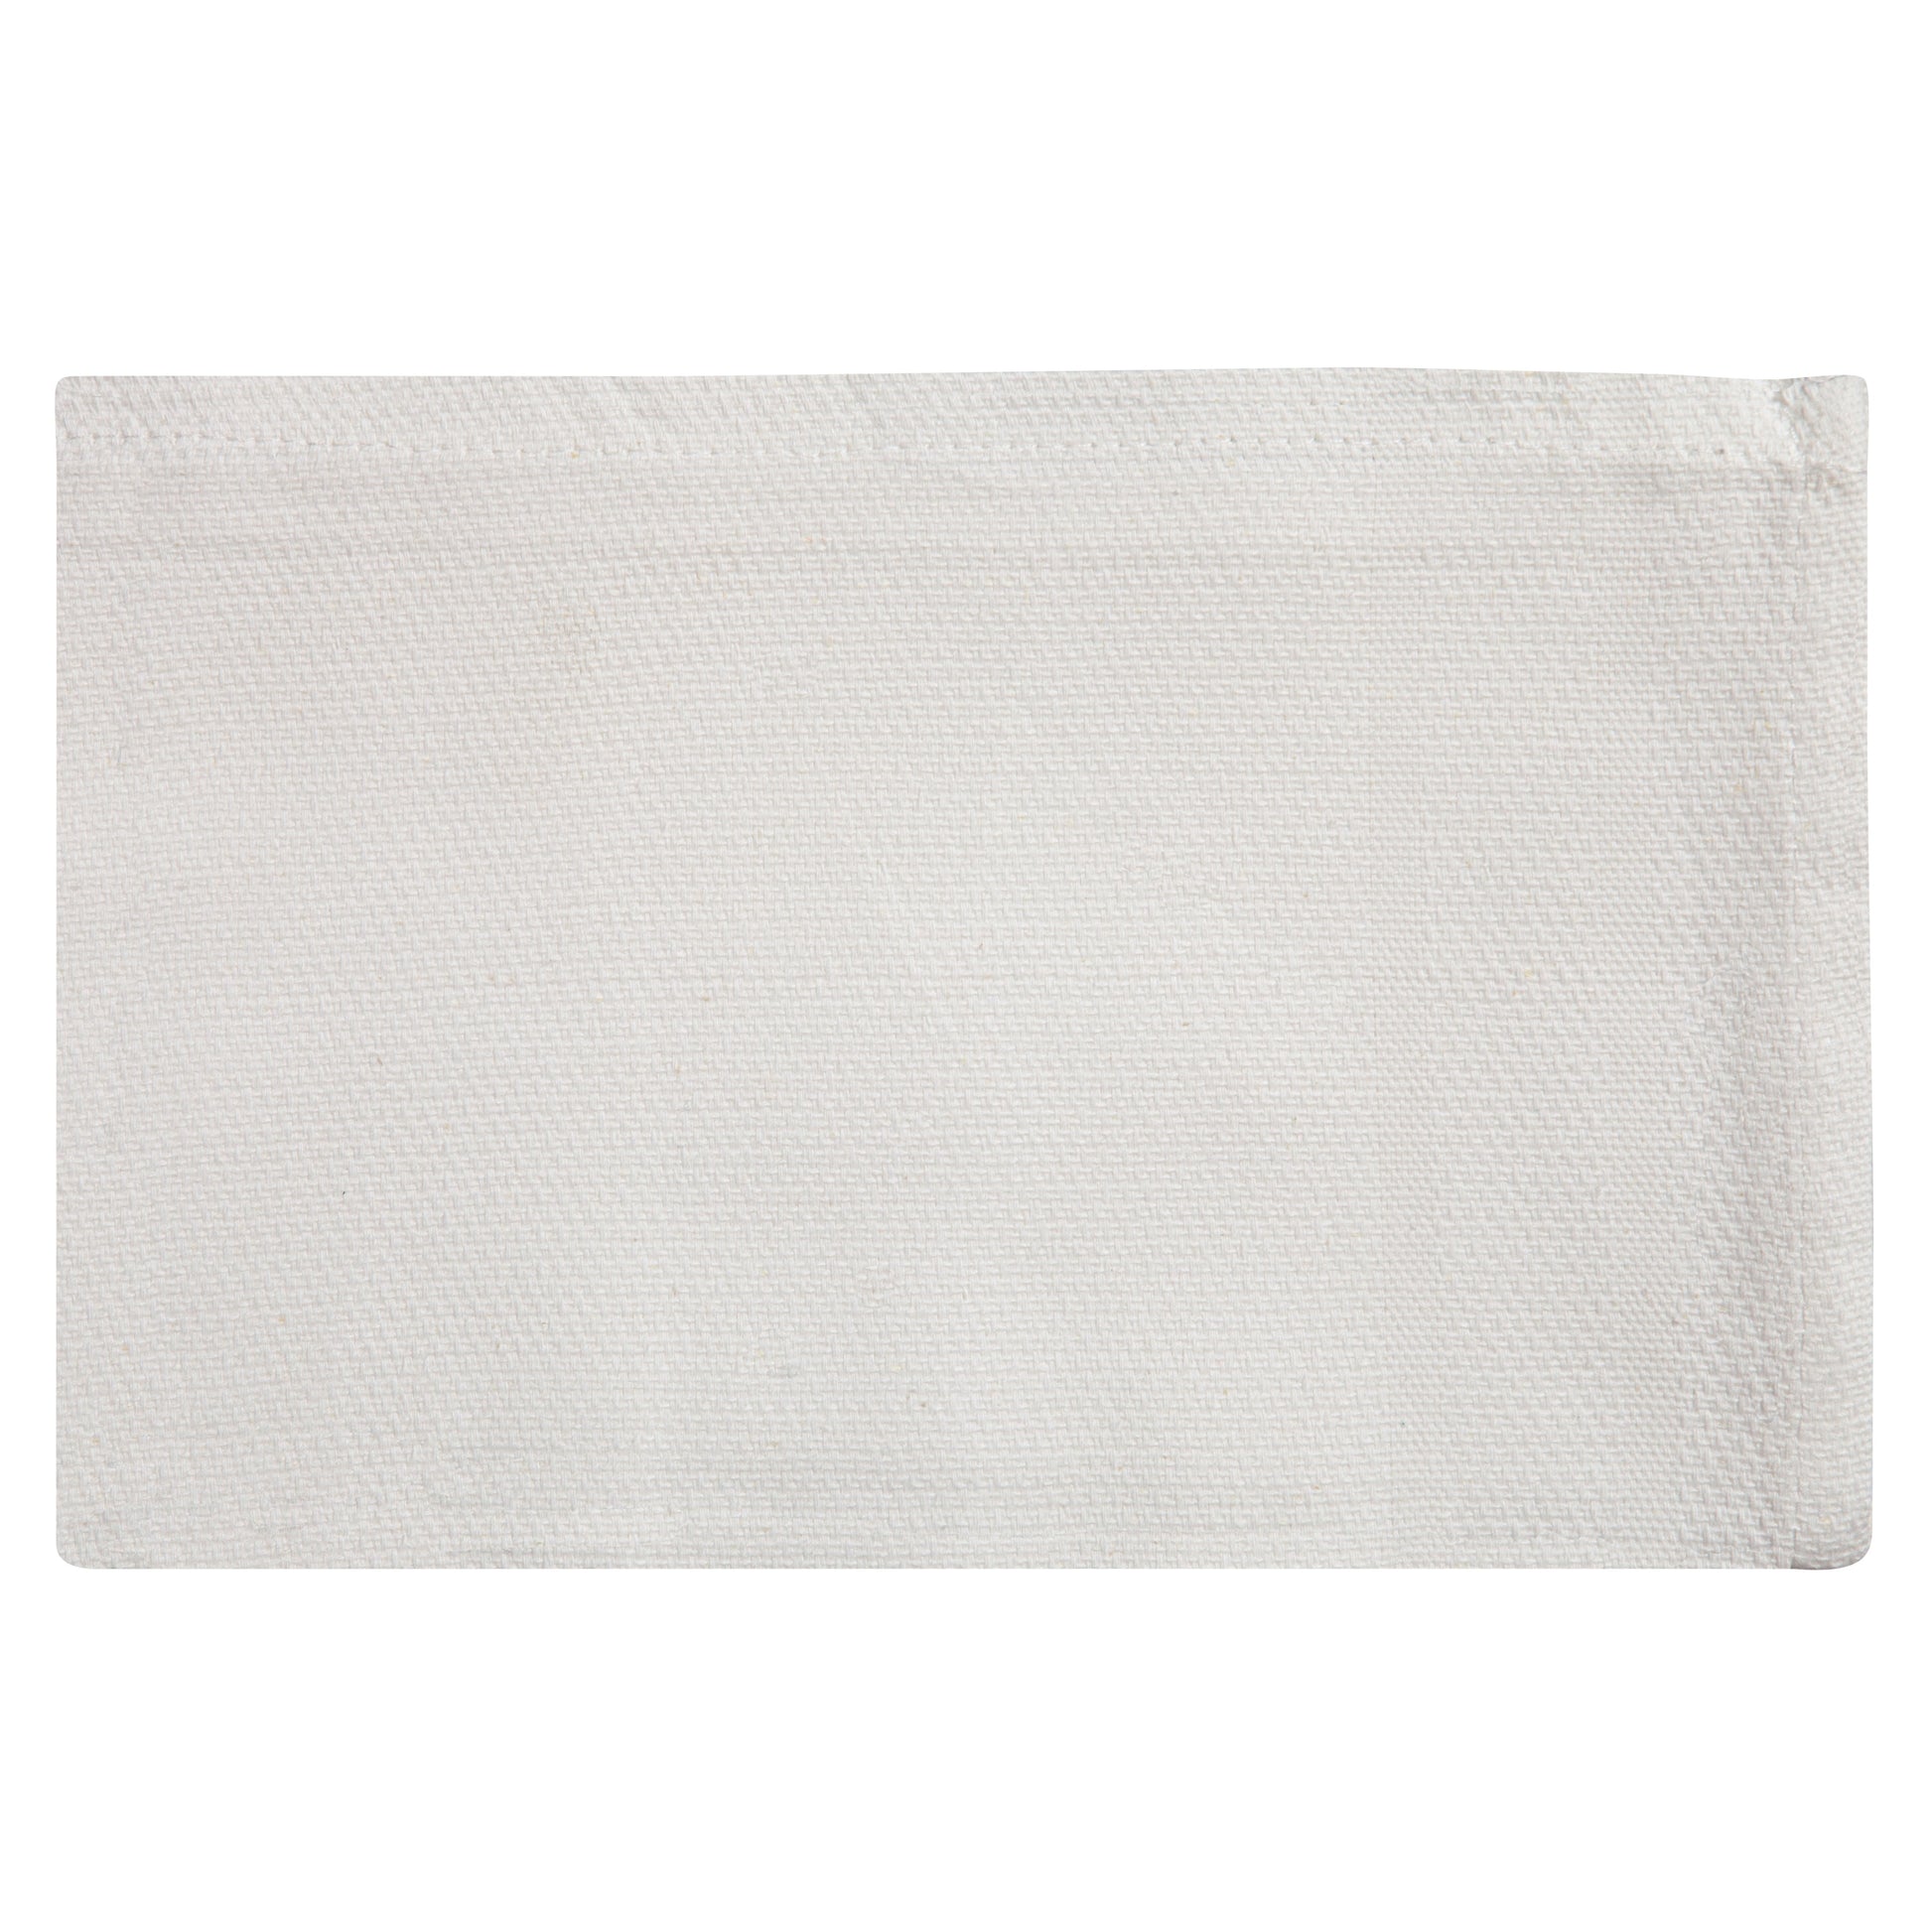 American Dawn | 18X33 Inch White Healthcare Towel | Operating Room Towel